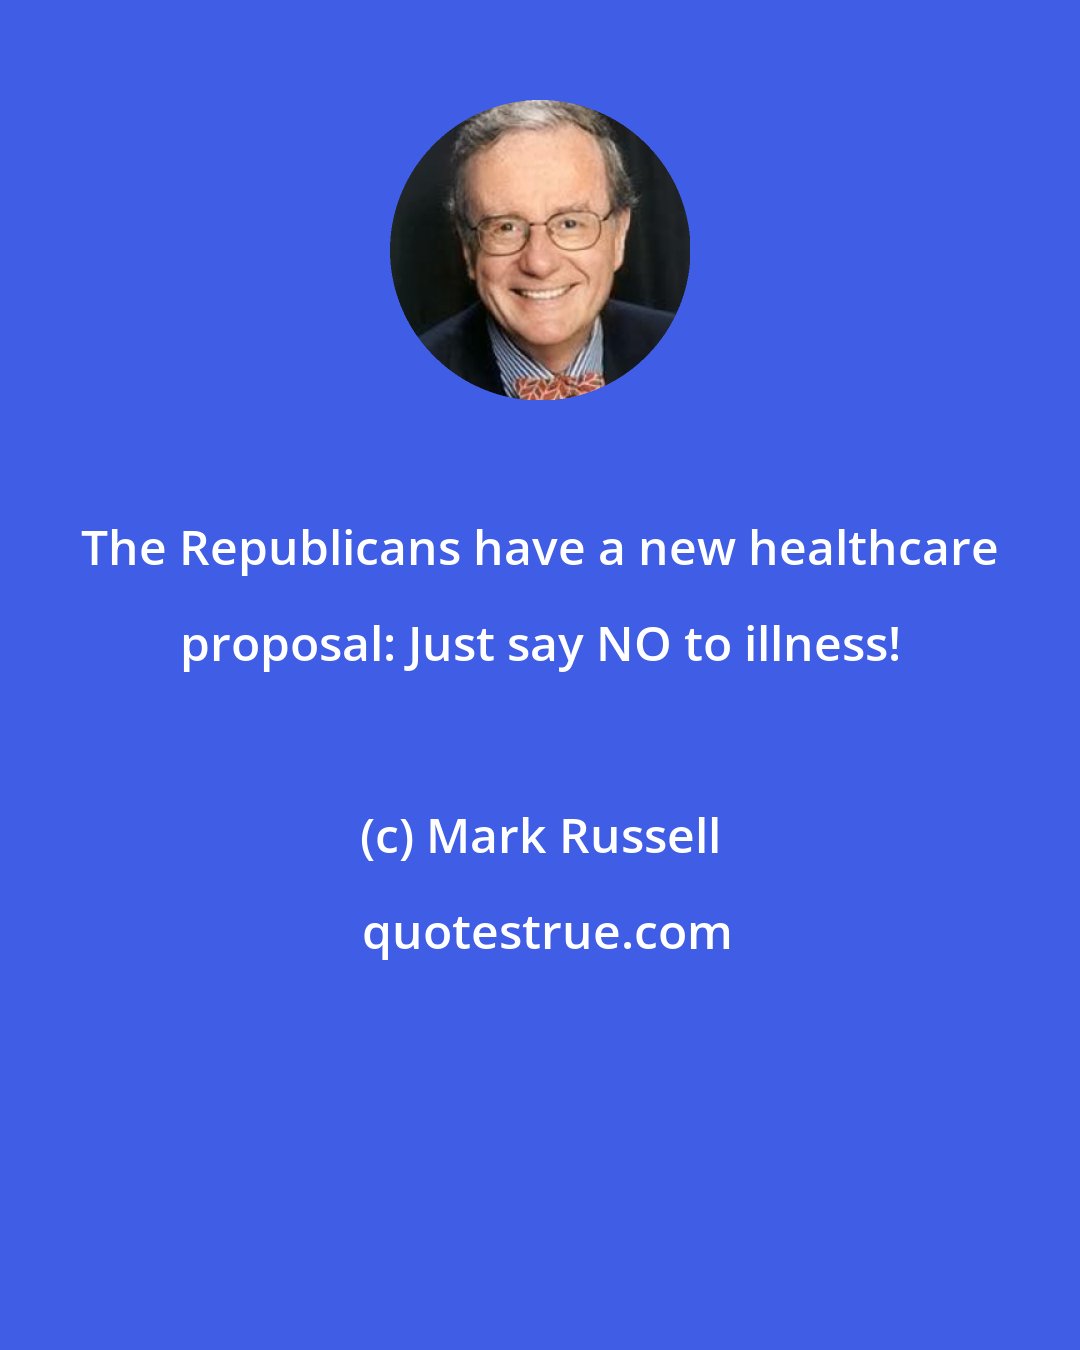 Mark Russell: The Republicans have a new healthcare proposal: Just say NO to illness!